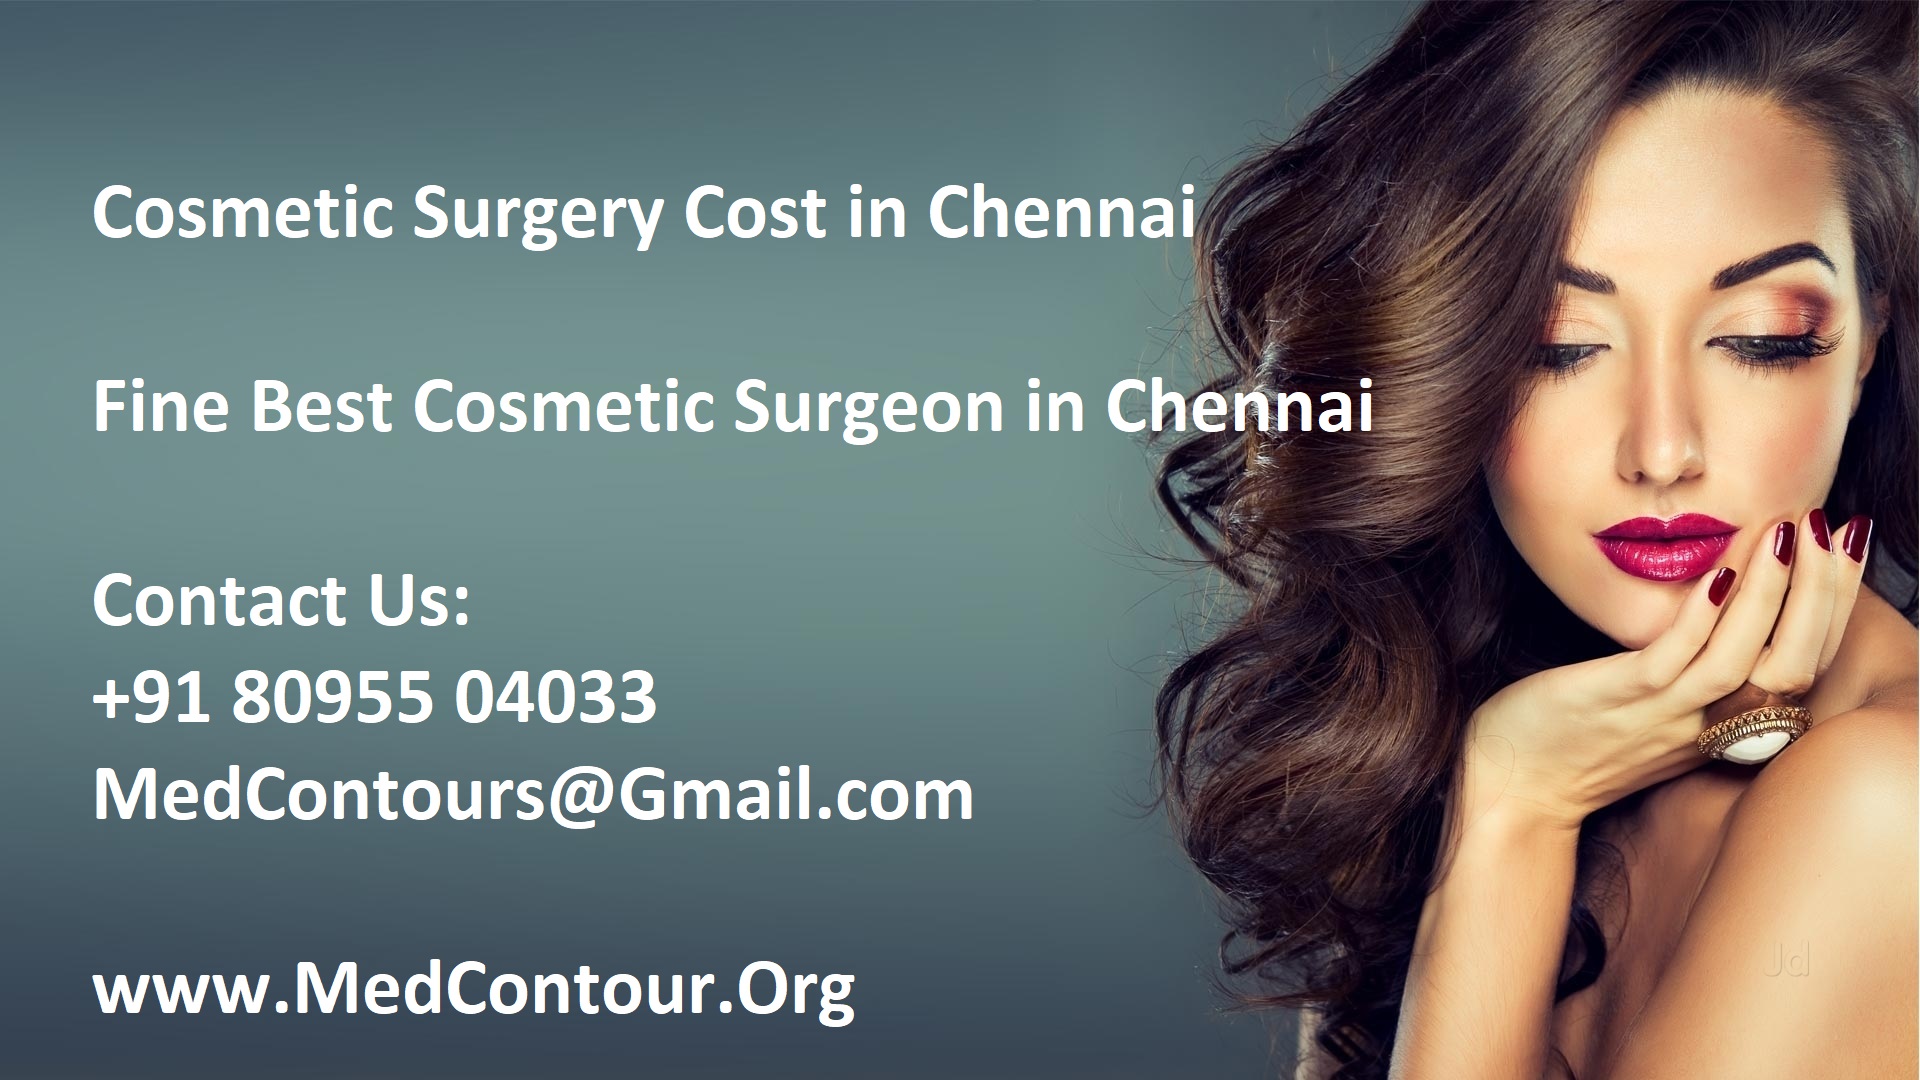 Cosmetic Surgery Cost In Chennai Find Reviews And Book Appointment Medcontour